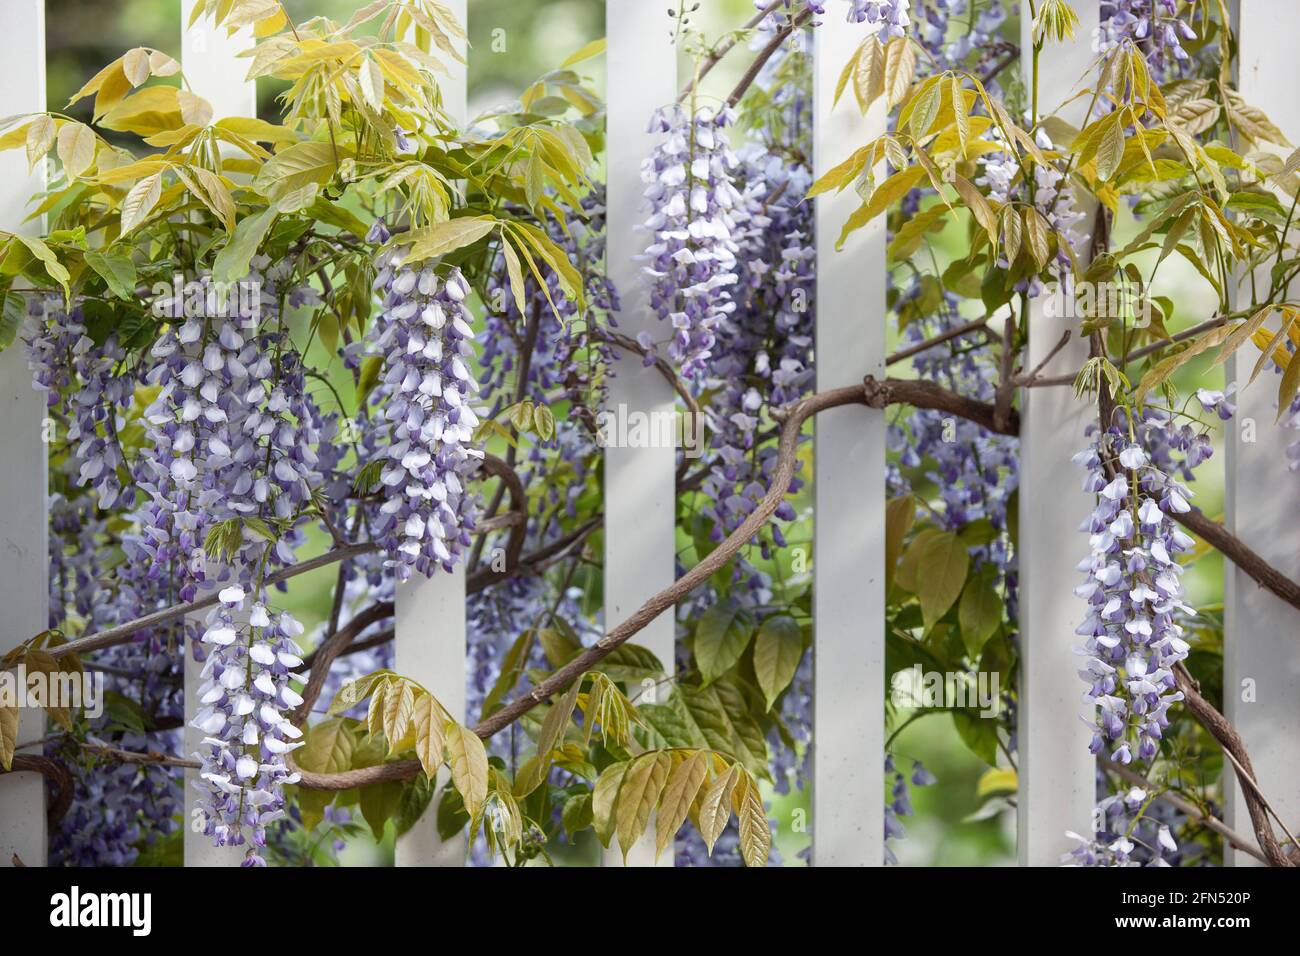 London, UK: In a garden in Clapham in the month of May, a wisteria sinensis 'Prolific' blooms on a white wooden balcony, its long dangling racemes of Stock Photo